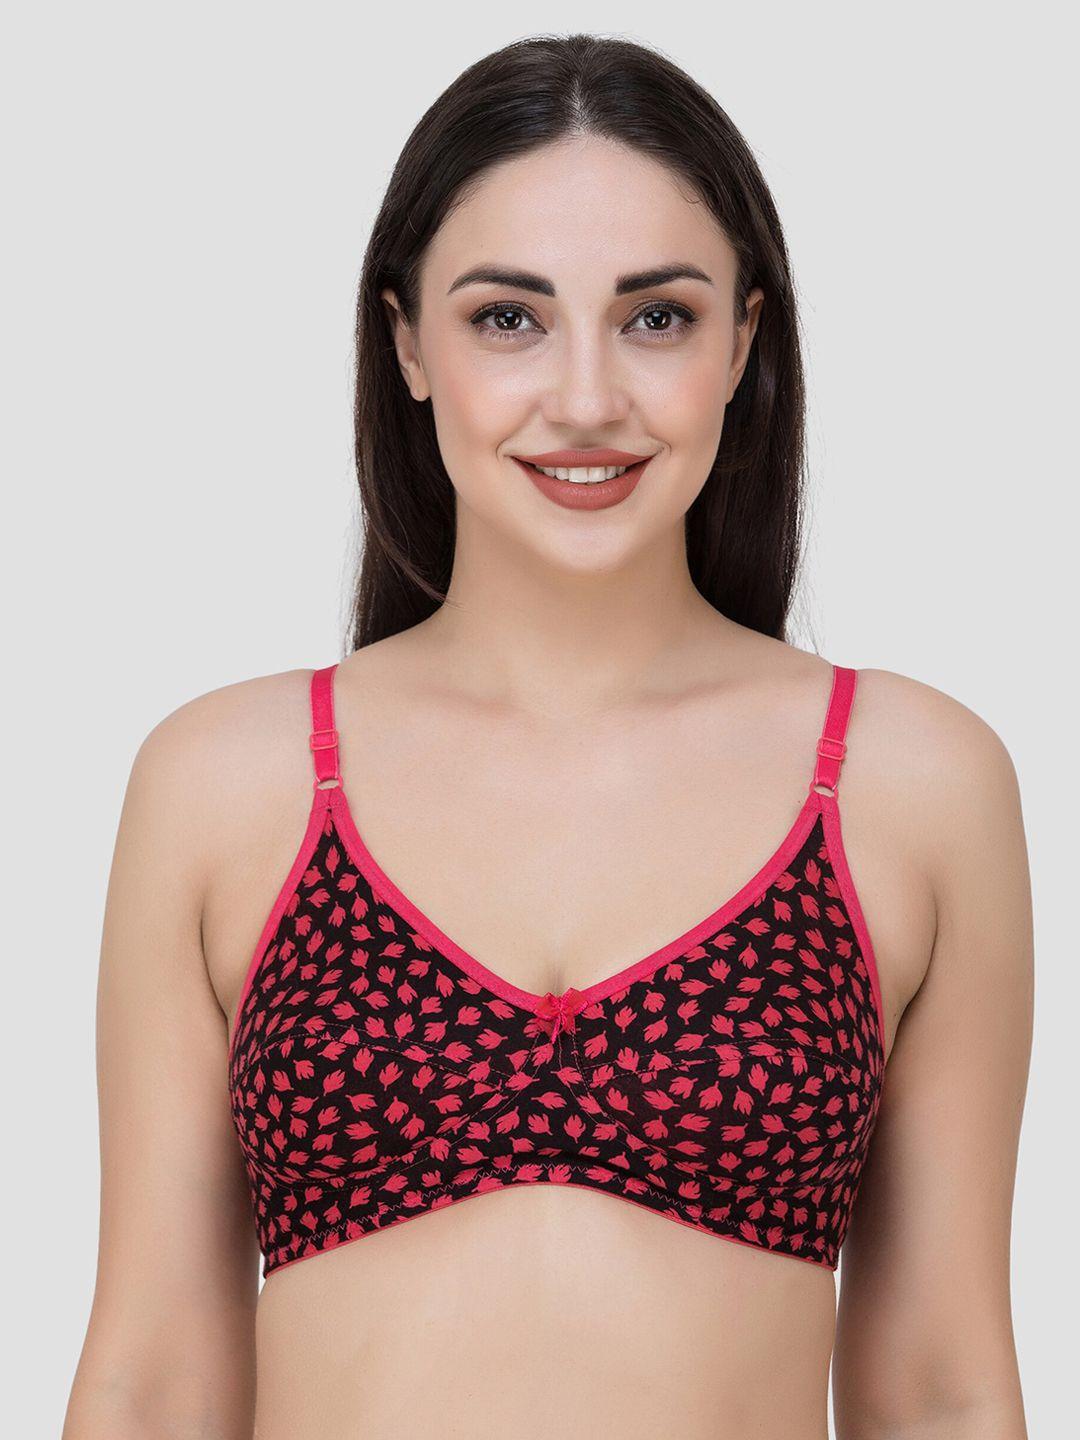 fasense black & red printed non-padded non-wired everyday bra bv005d